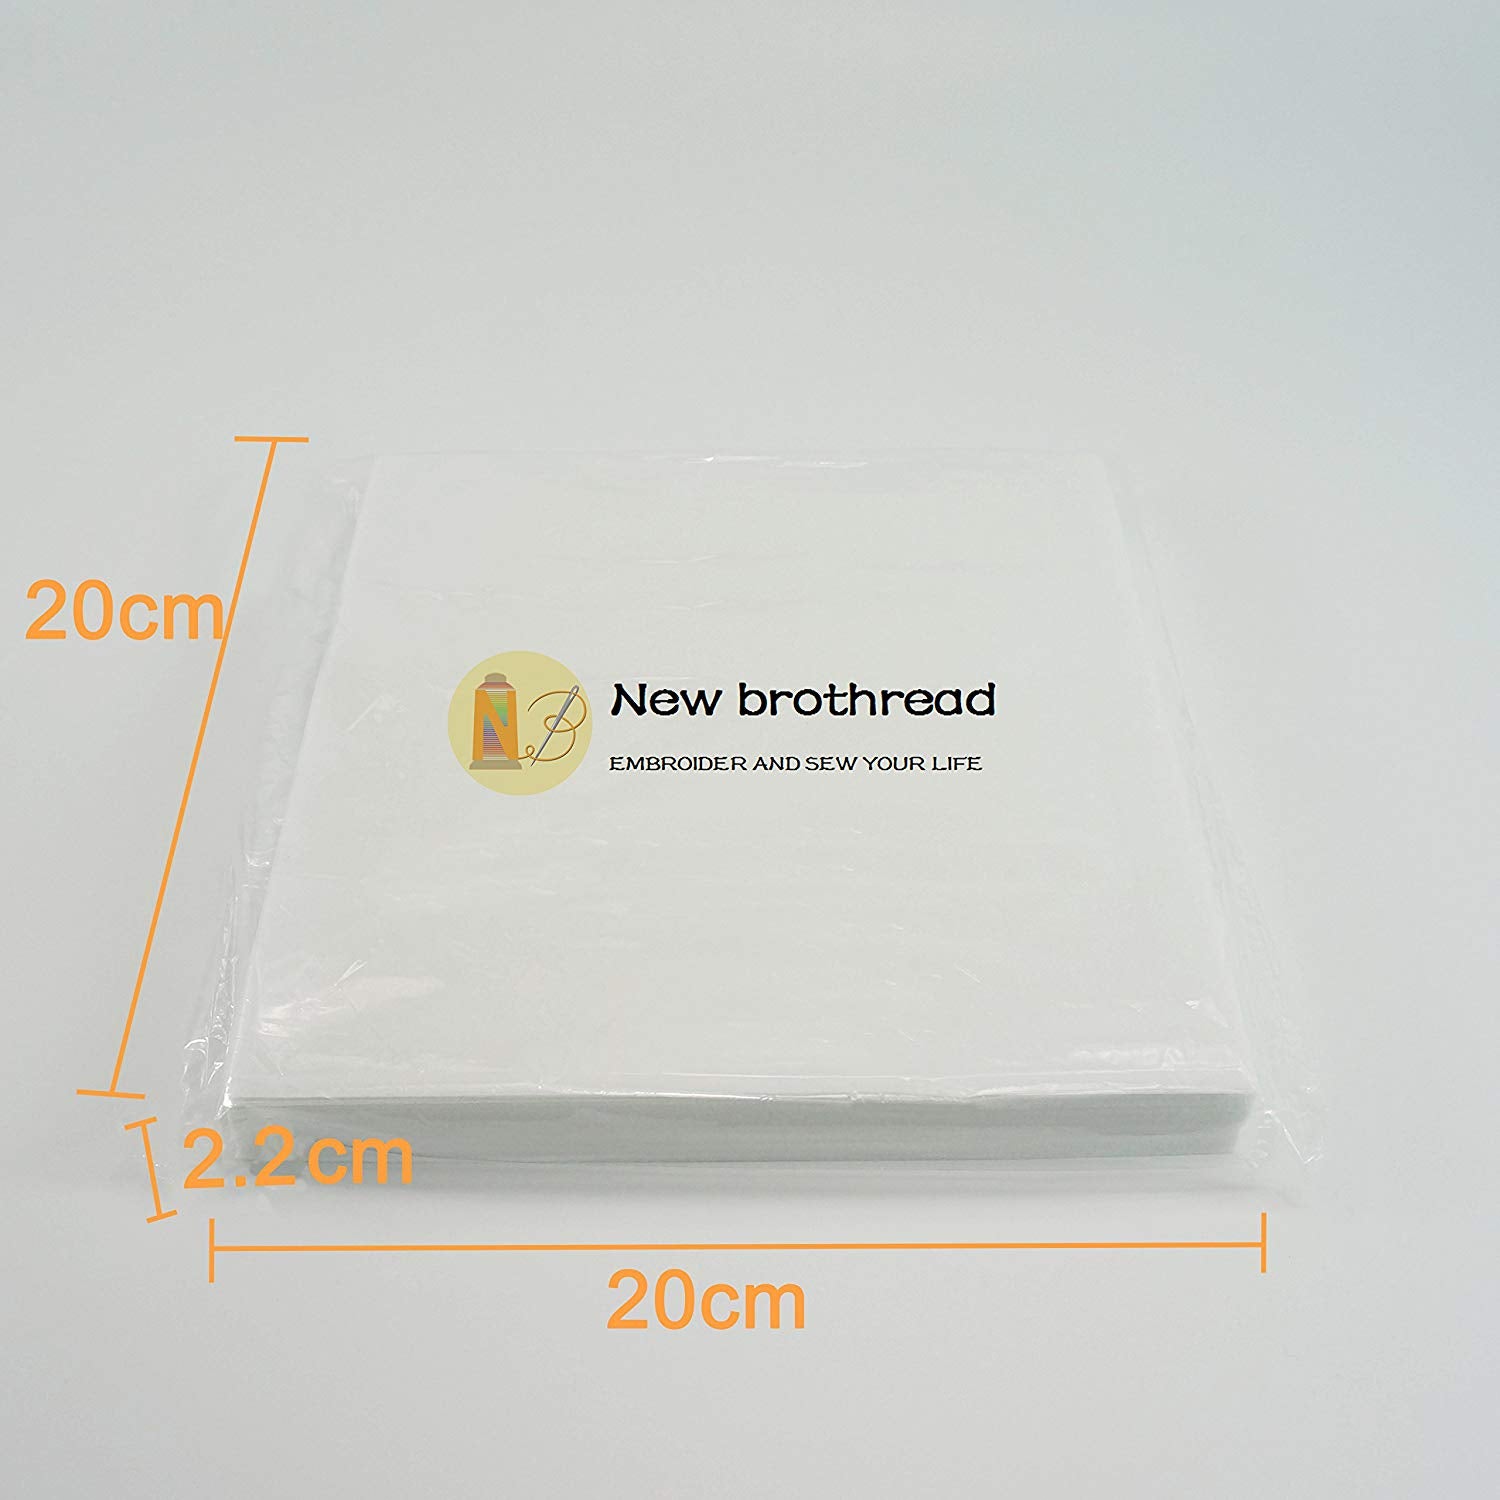  Tearaway Machine Embroidery Stabilizer Backing 100 Precut  Sheets - 8x8 inch fits 4x4 inch Hoop 45gms : Arts, Crafts & Sewing